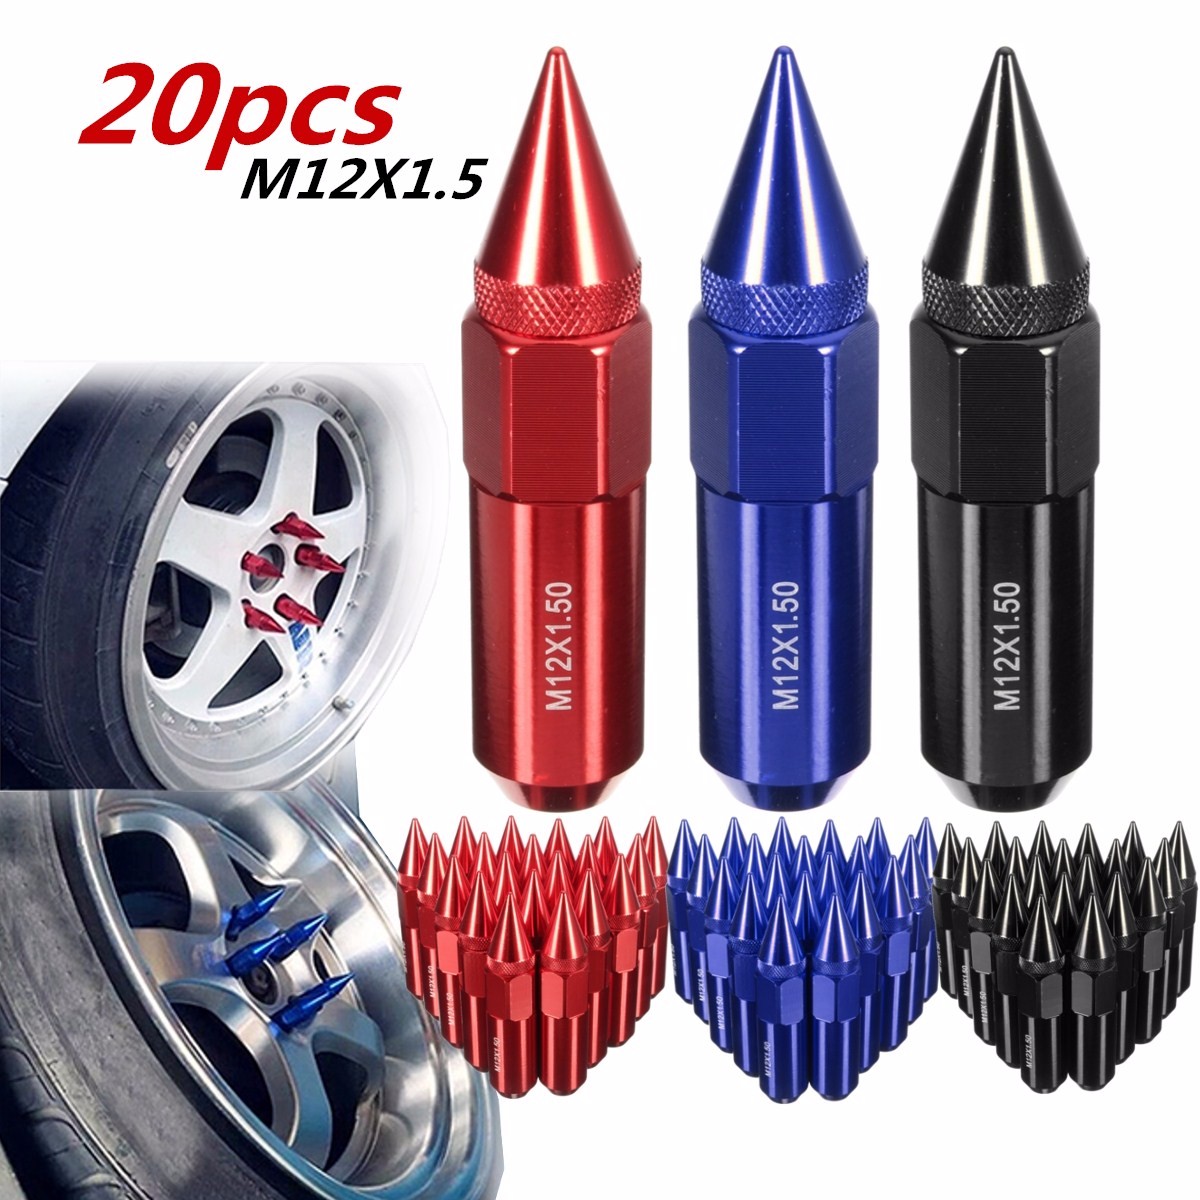 M12X1.5/M12X1.25 Spiked Aluminum Extended Tuner Wheels Rims Lug Nuts